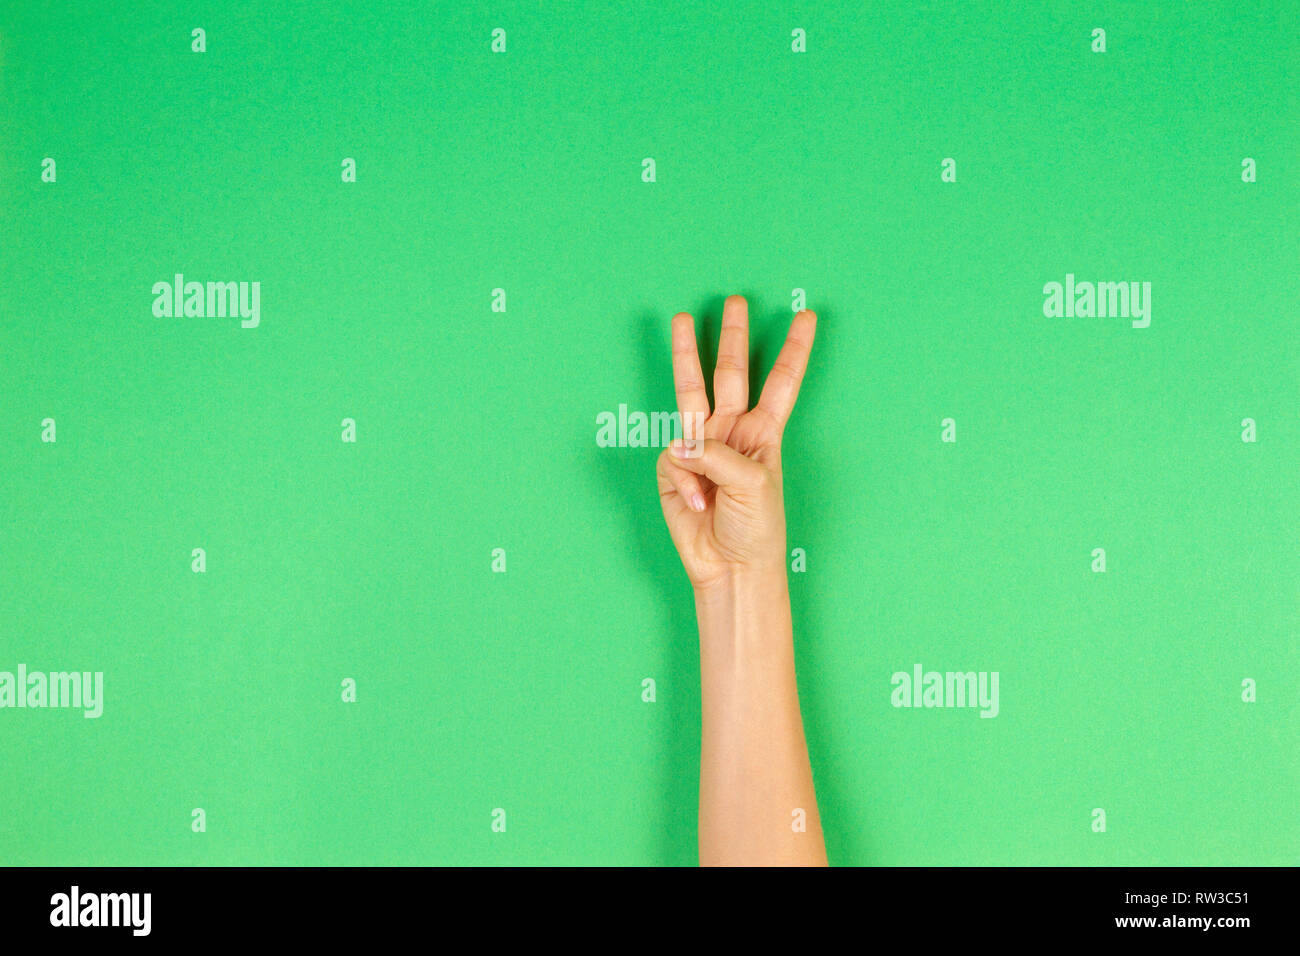 Kid hand showing three fingers on green background Stock Photo